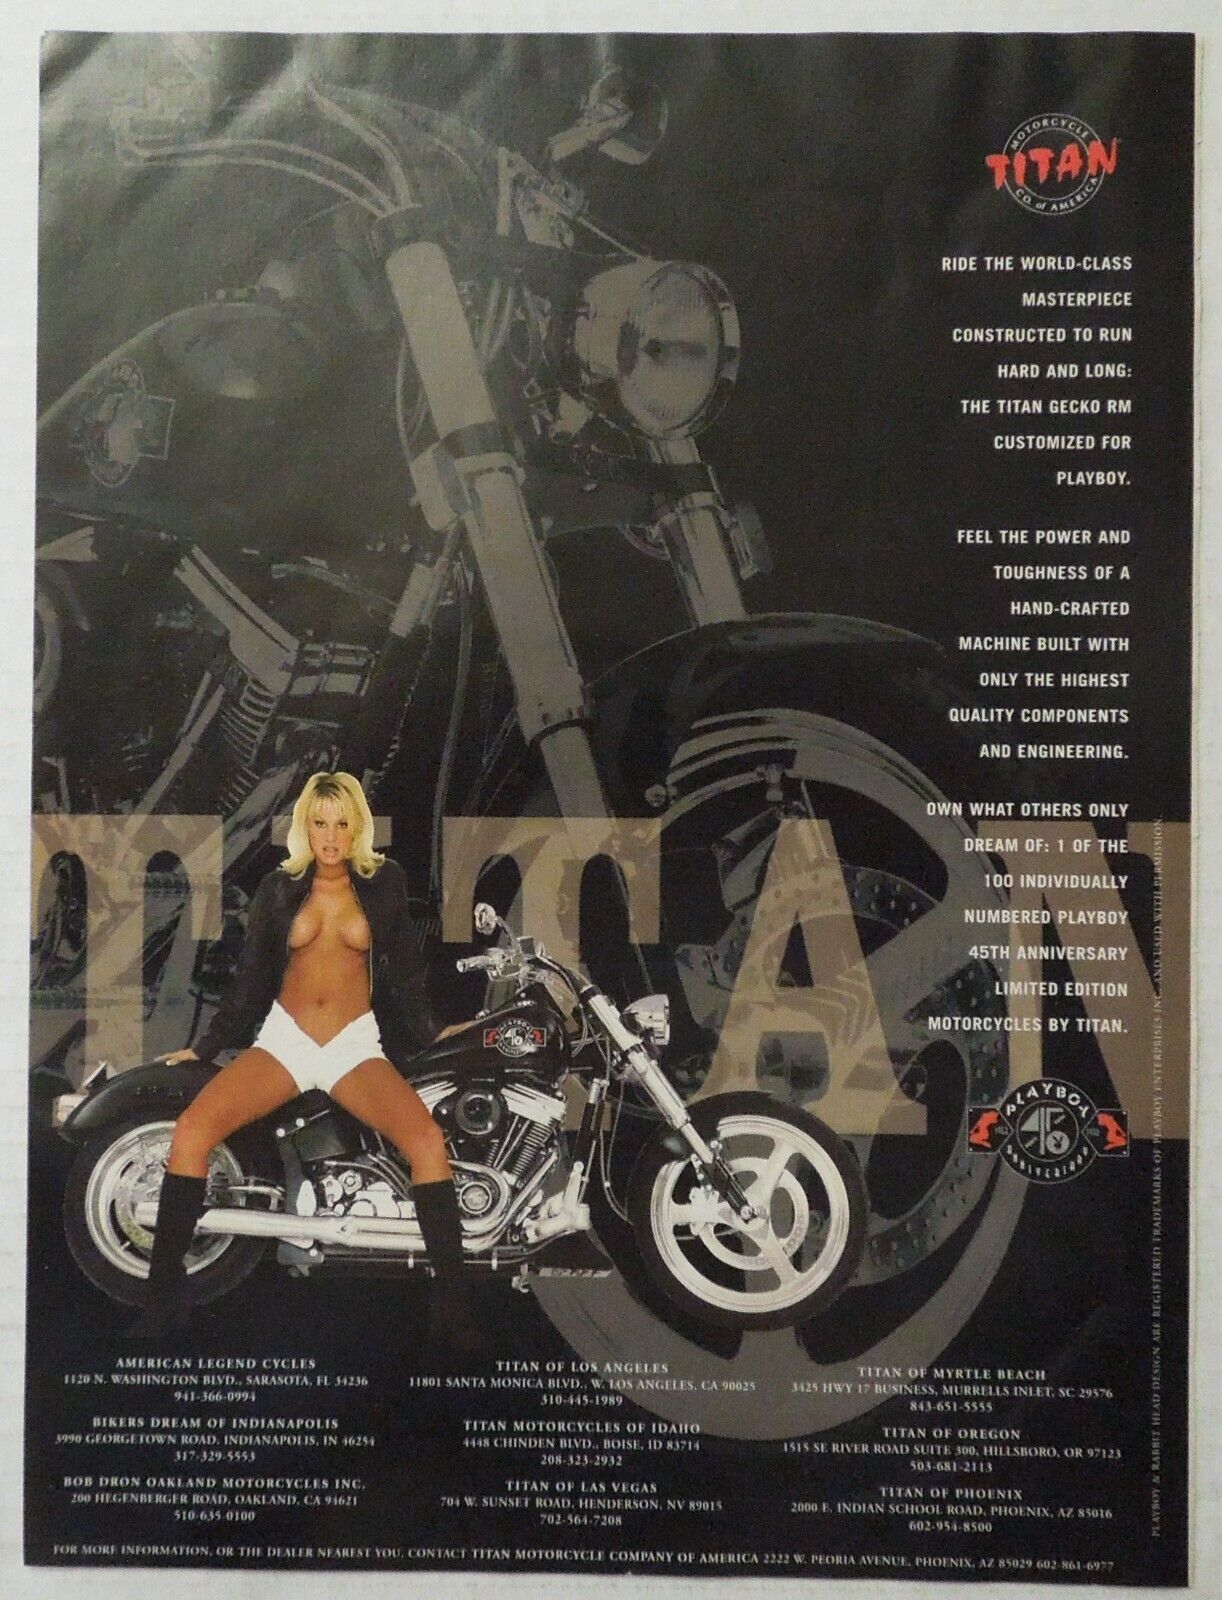 1999 PLAYBOY 45th Anniversary Limited Edition TITAN MOTORCYCLES Magazine Ad